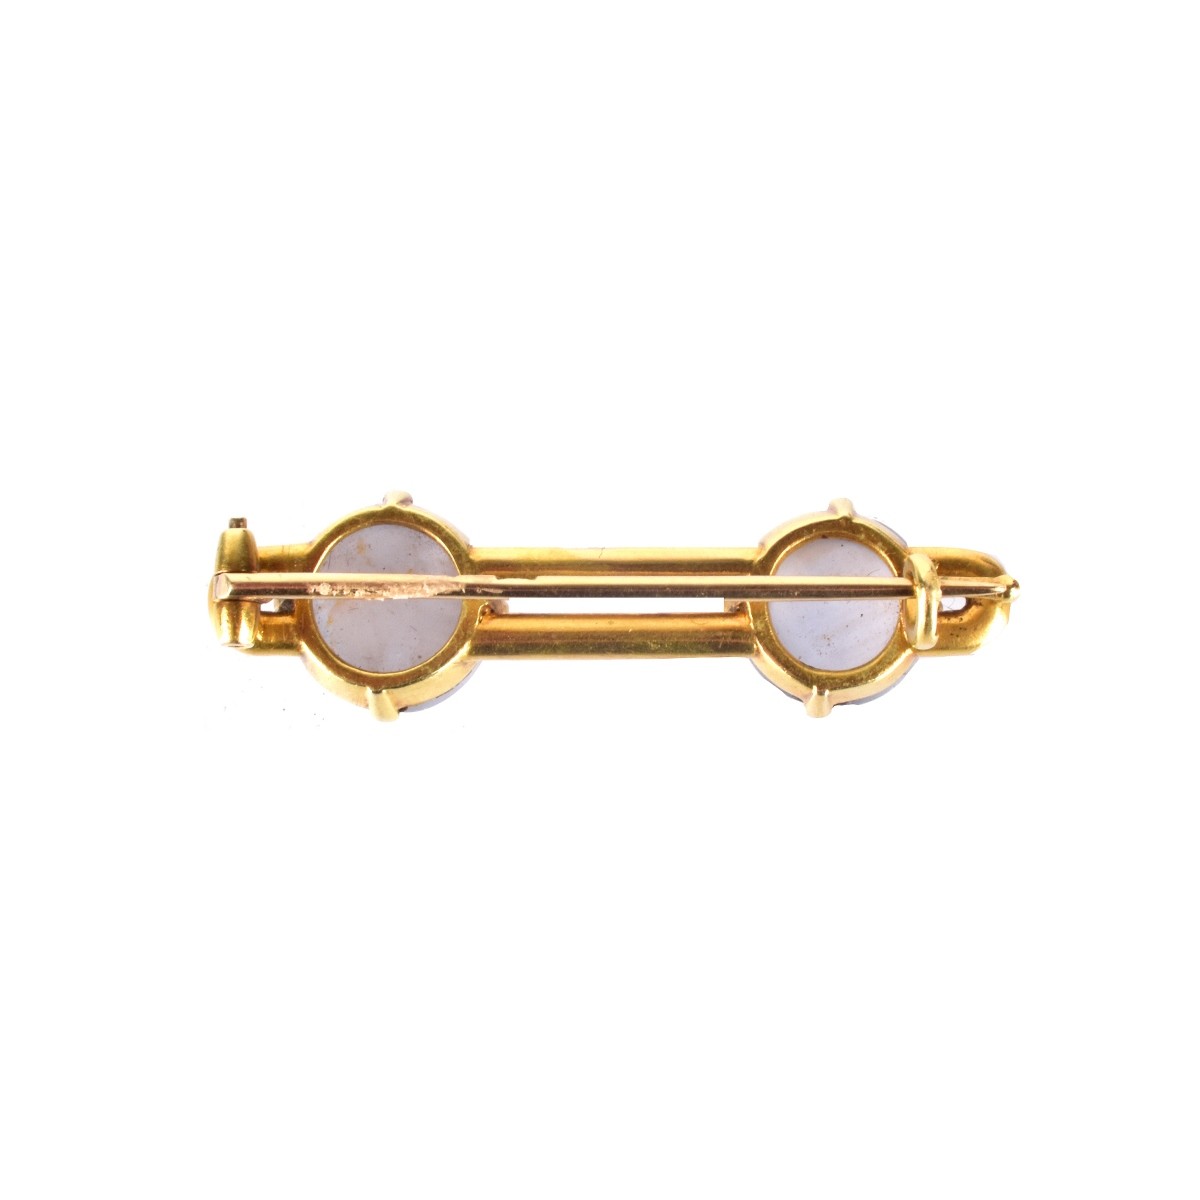 Russian Sapphire and 14K Brooch